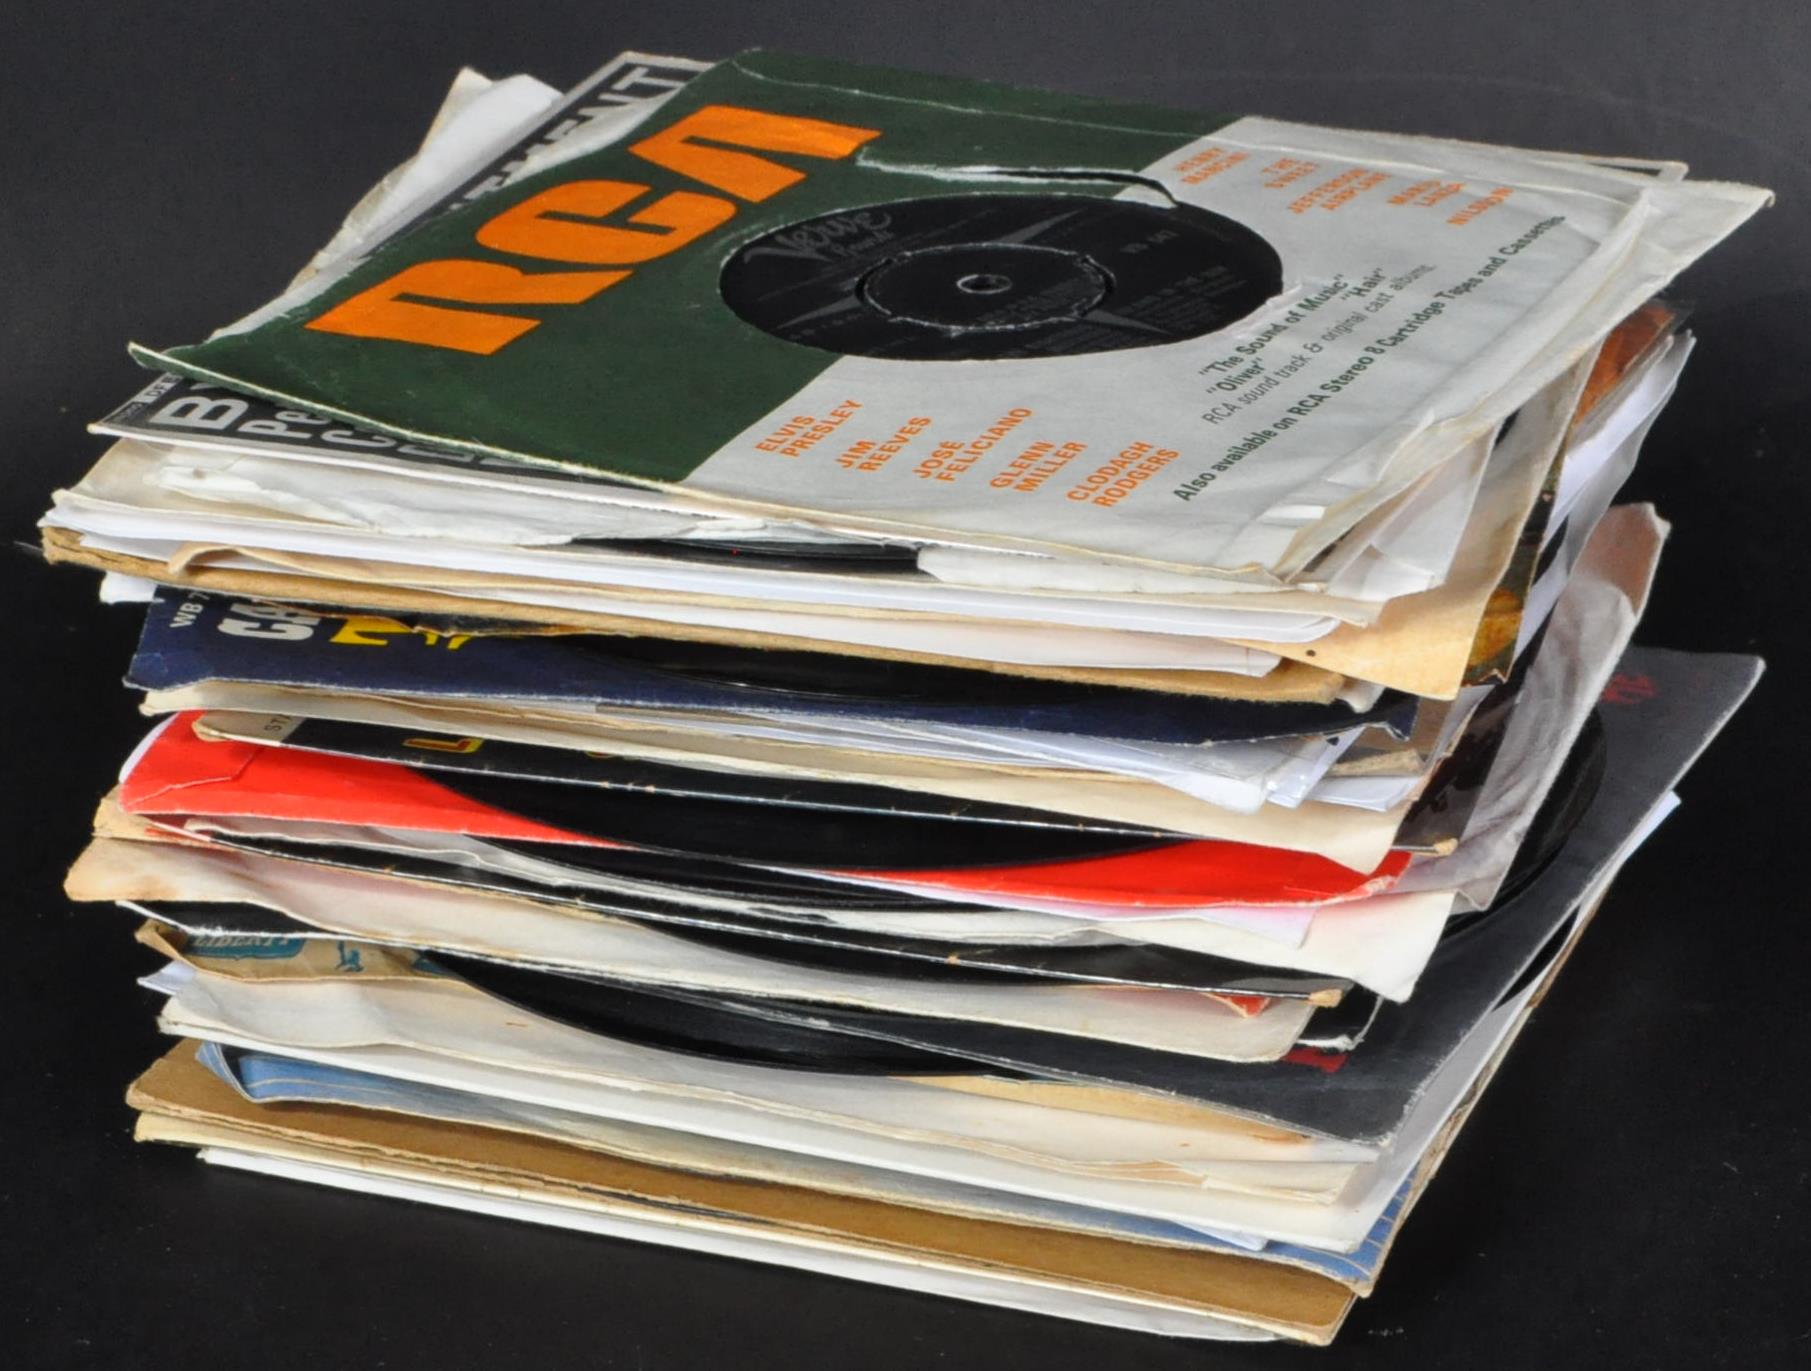 POP / ROCK / SOUL AND MORE - COLLECTION OF 50+ 45RPM VINYL SINGLES - Image 6 of 6